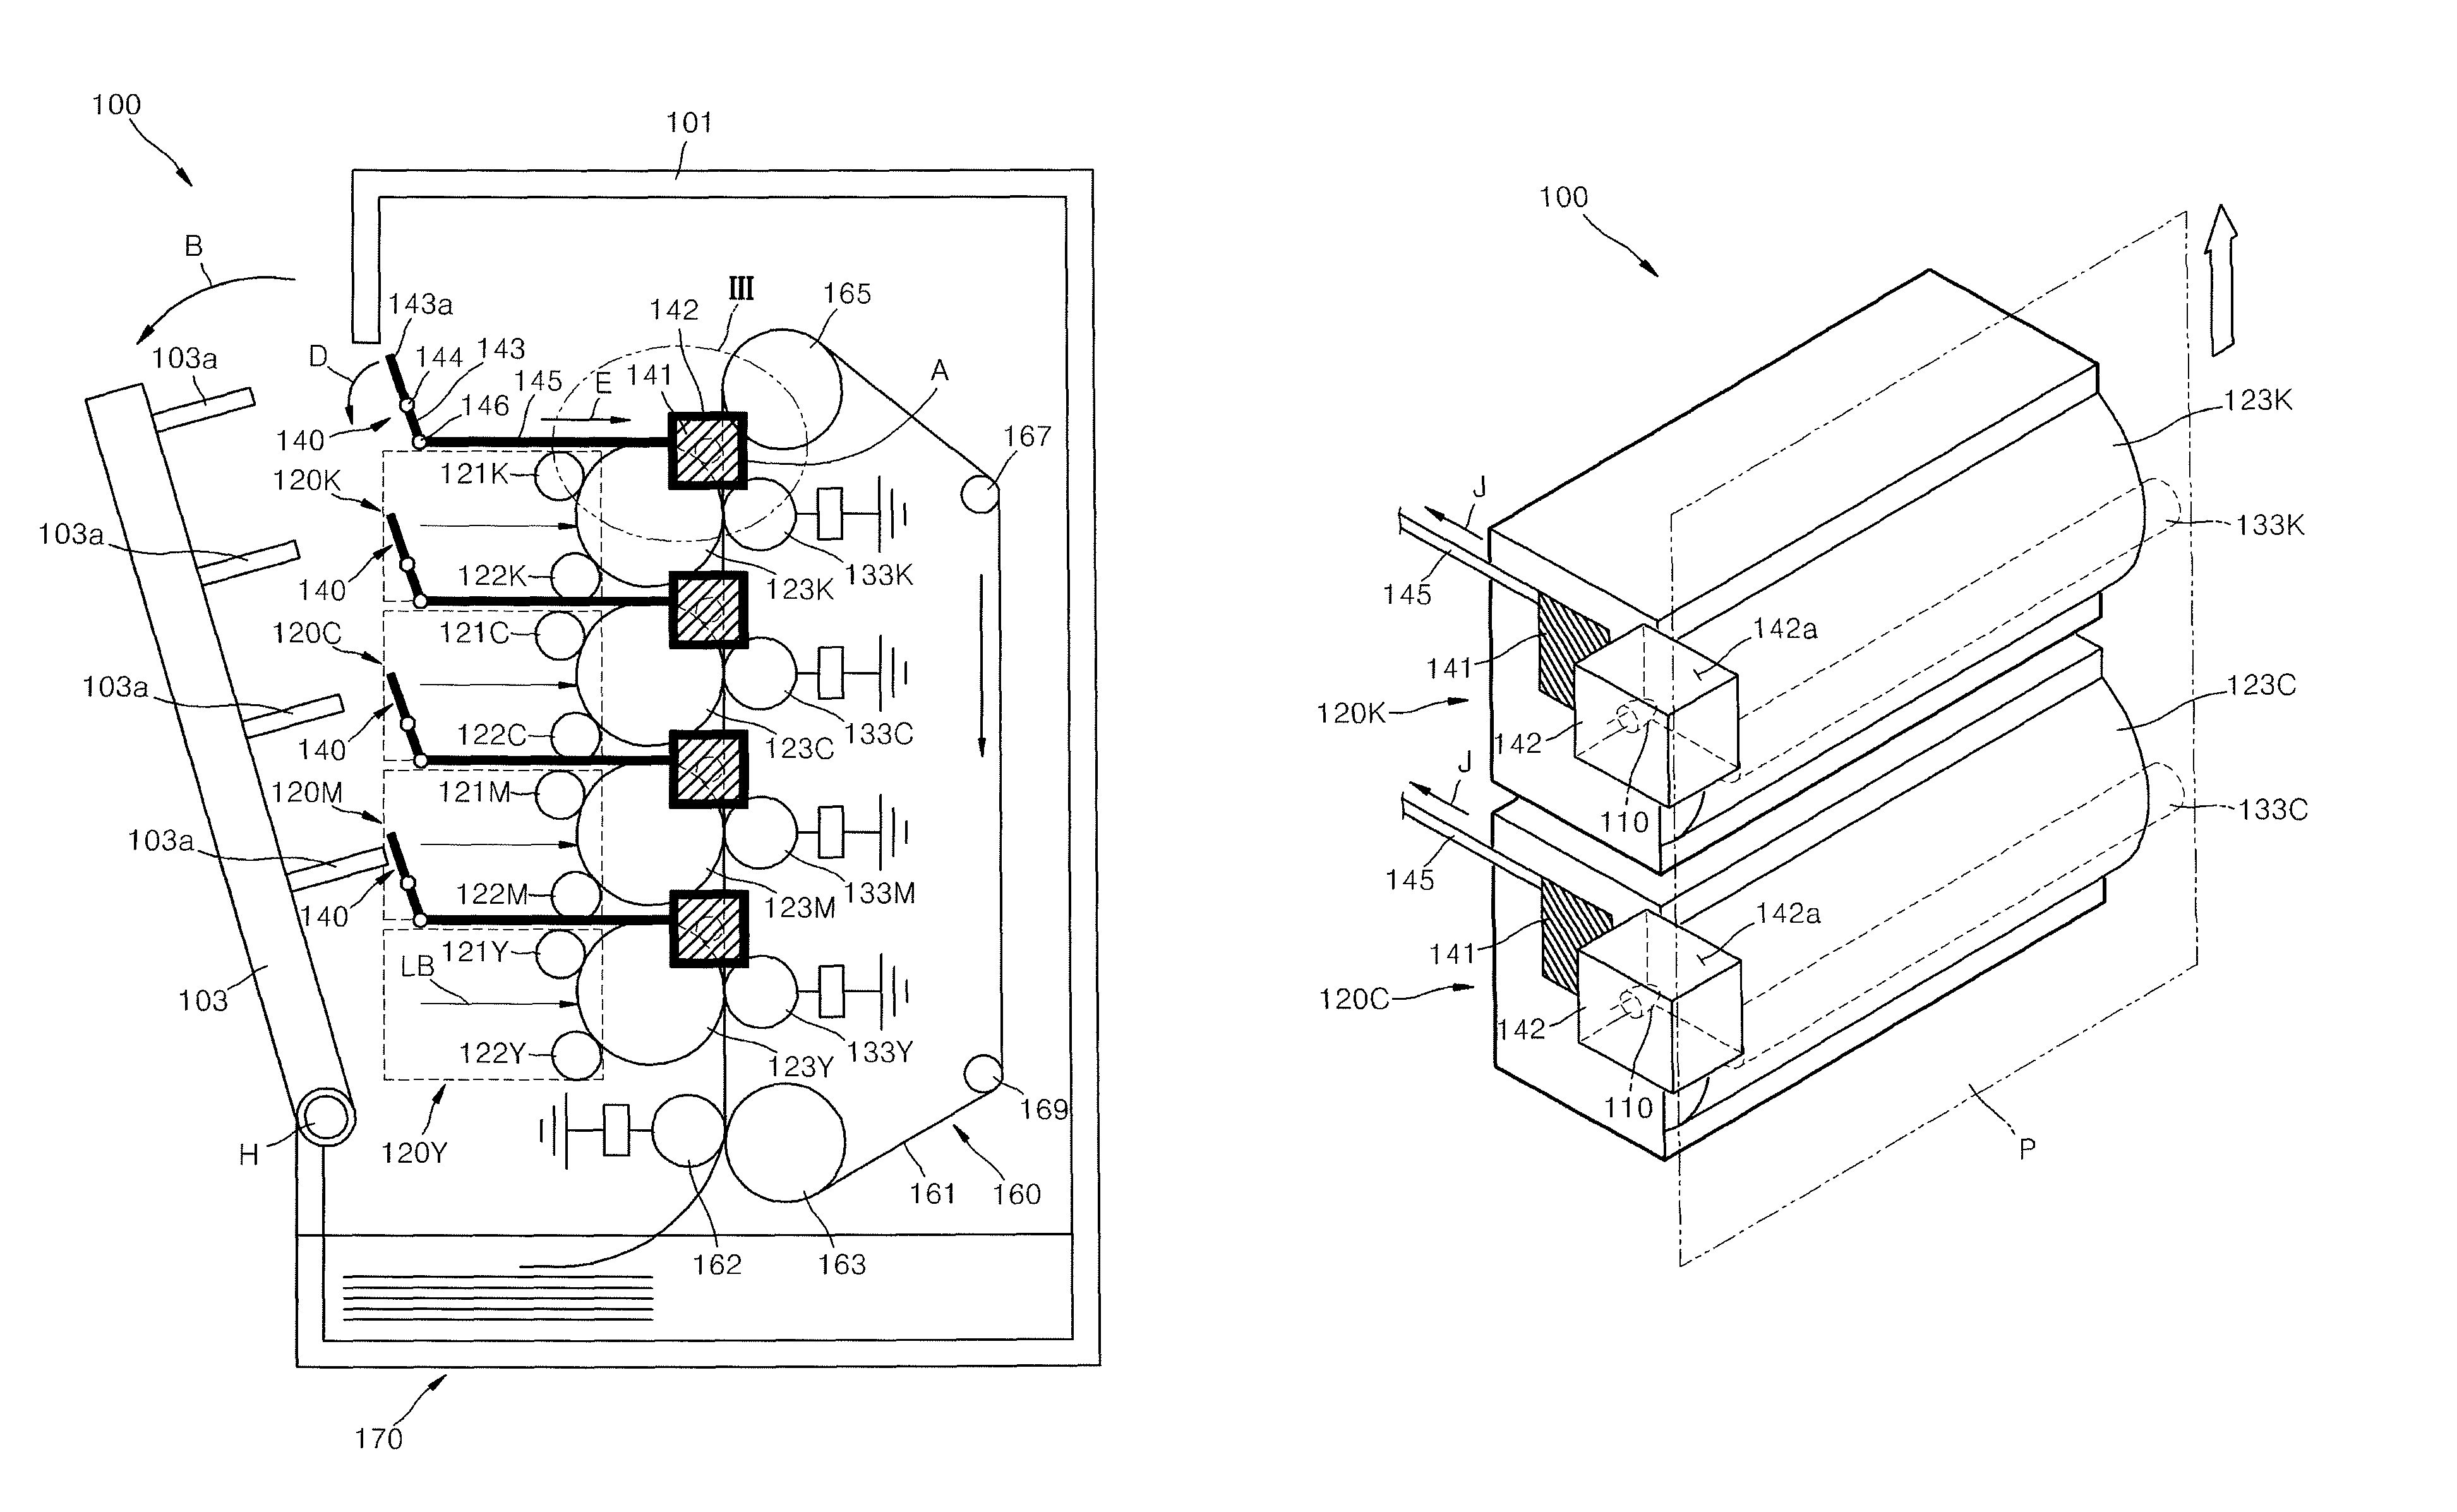 Image forming apparatus with a light scanning lamp blocking device, operating method thereof and a cartridge usable with the image forming apparatus